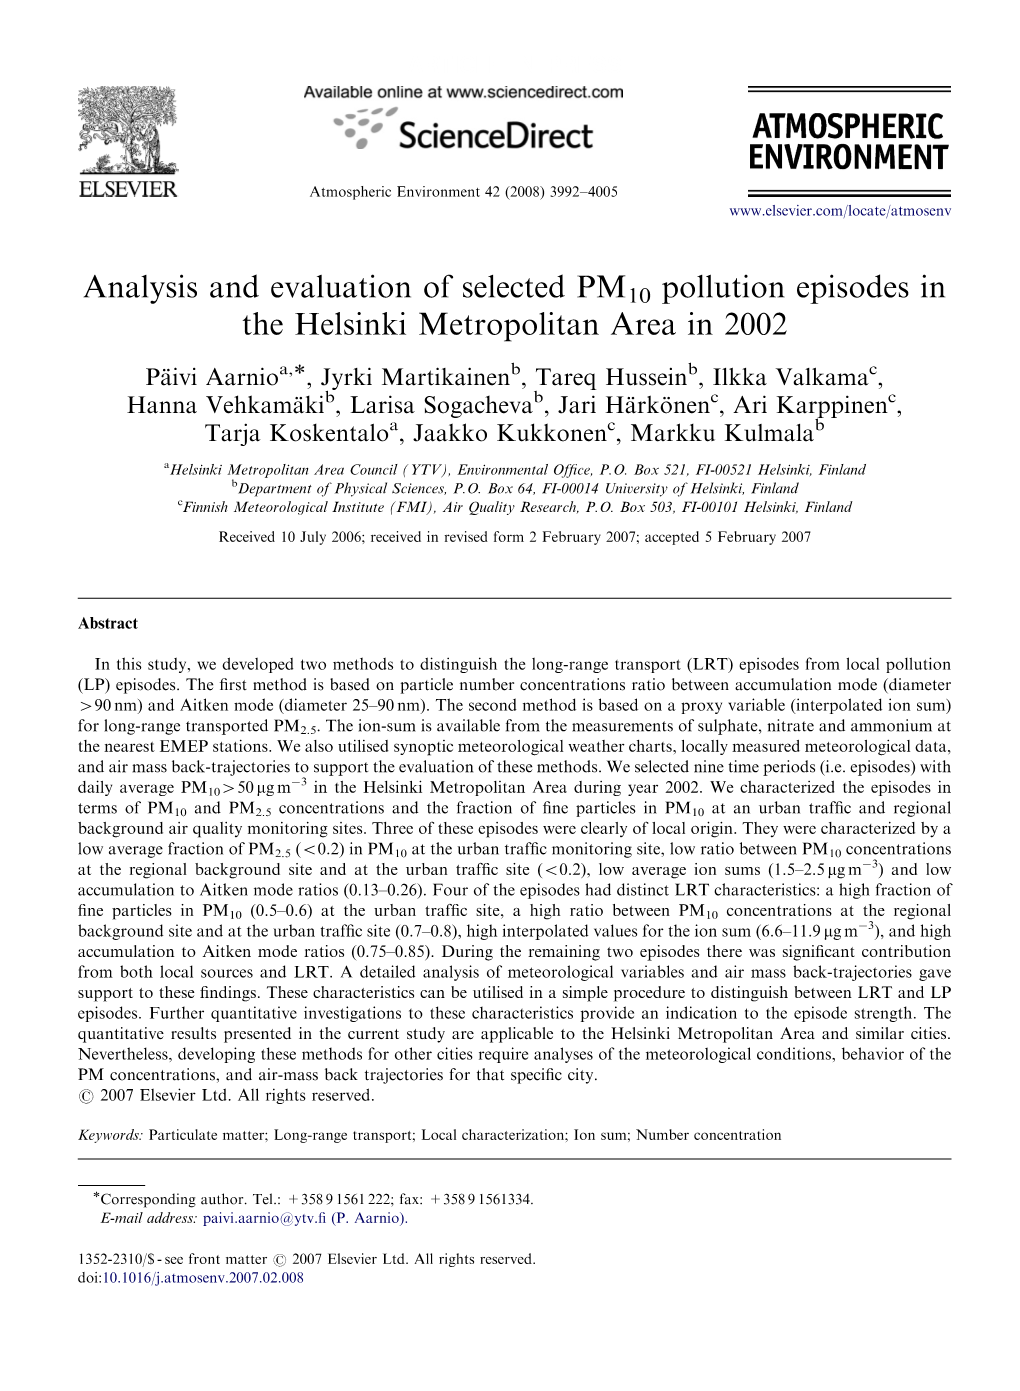 Analysis and Evaluation of Selected PM10 Pollution Episodes in the Helsinki Metropolitan Area in 2002